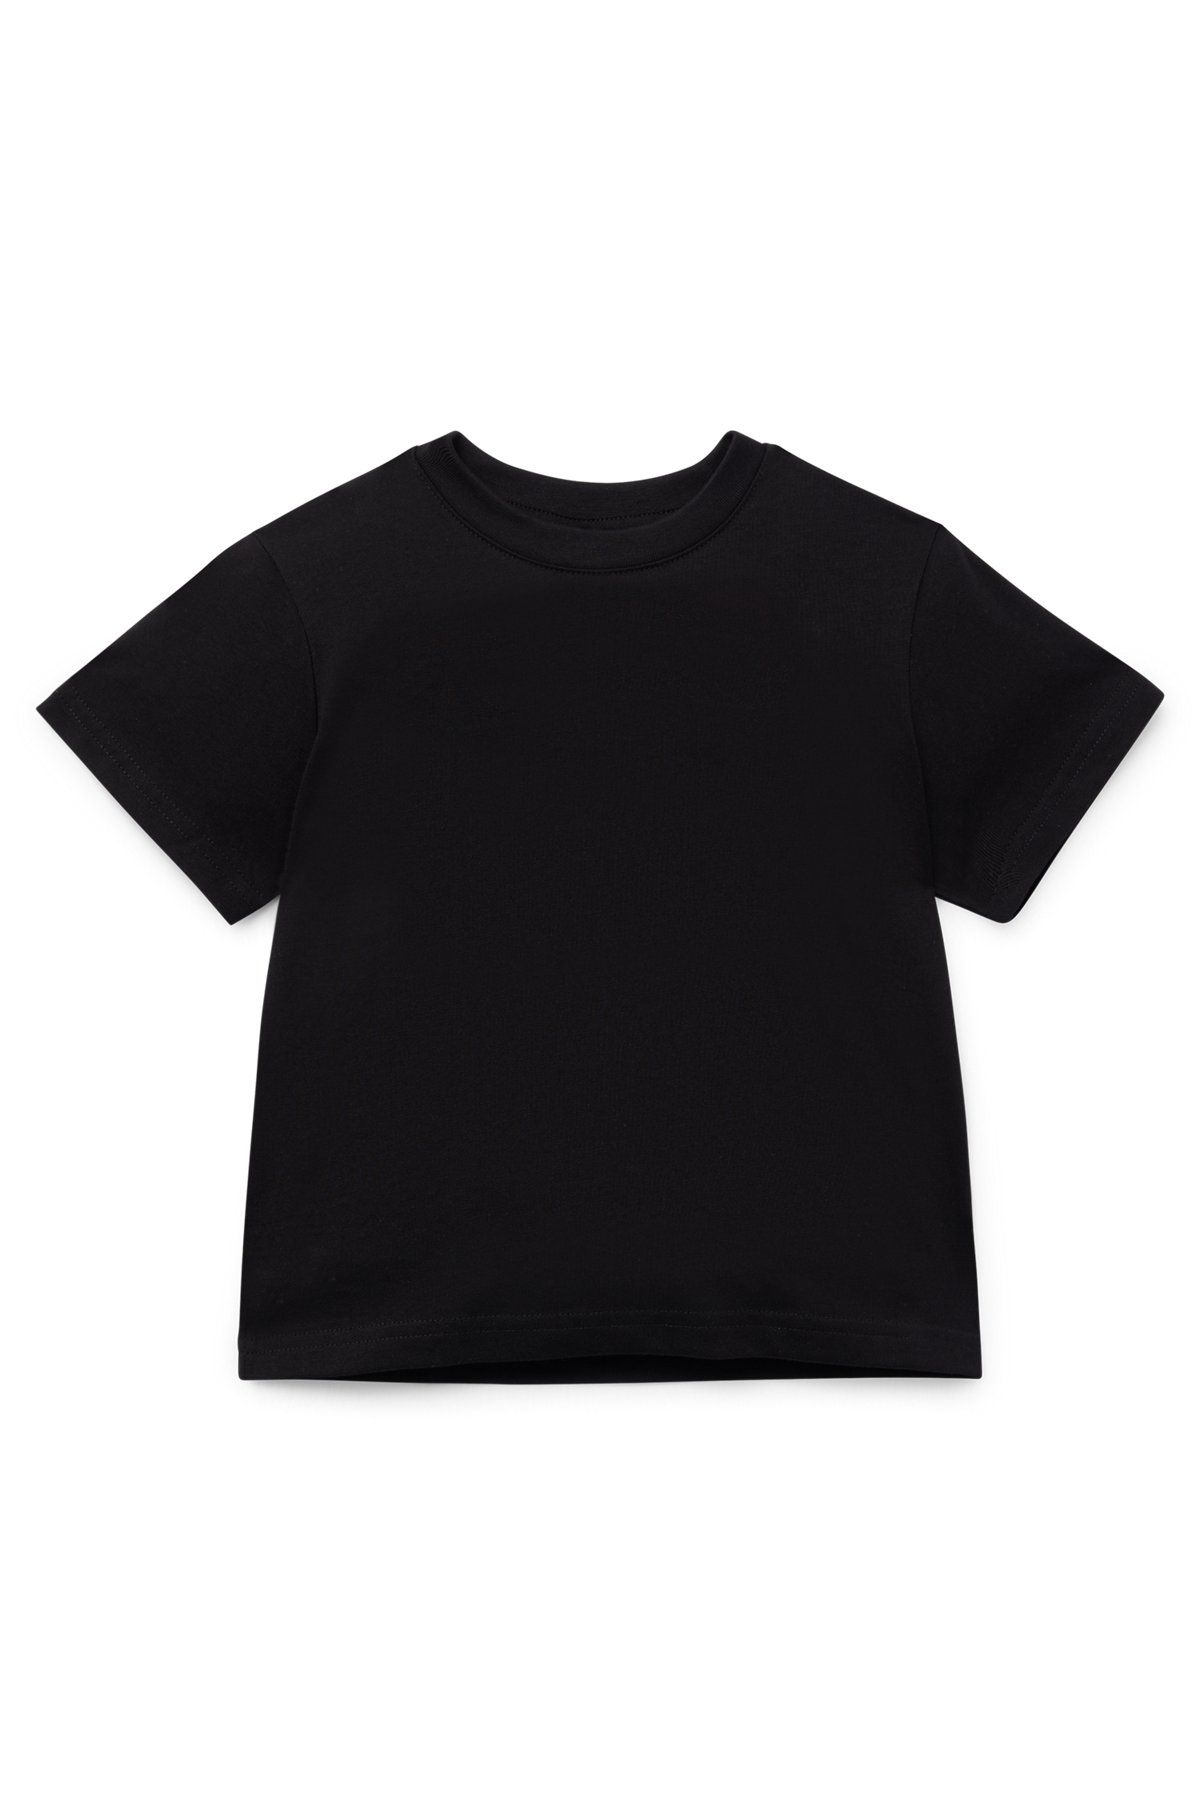 Kids' T-shirt in cotton with framed logo print, Black